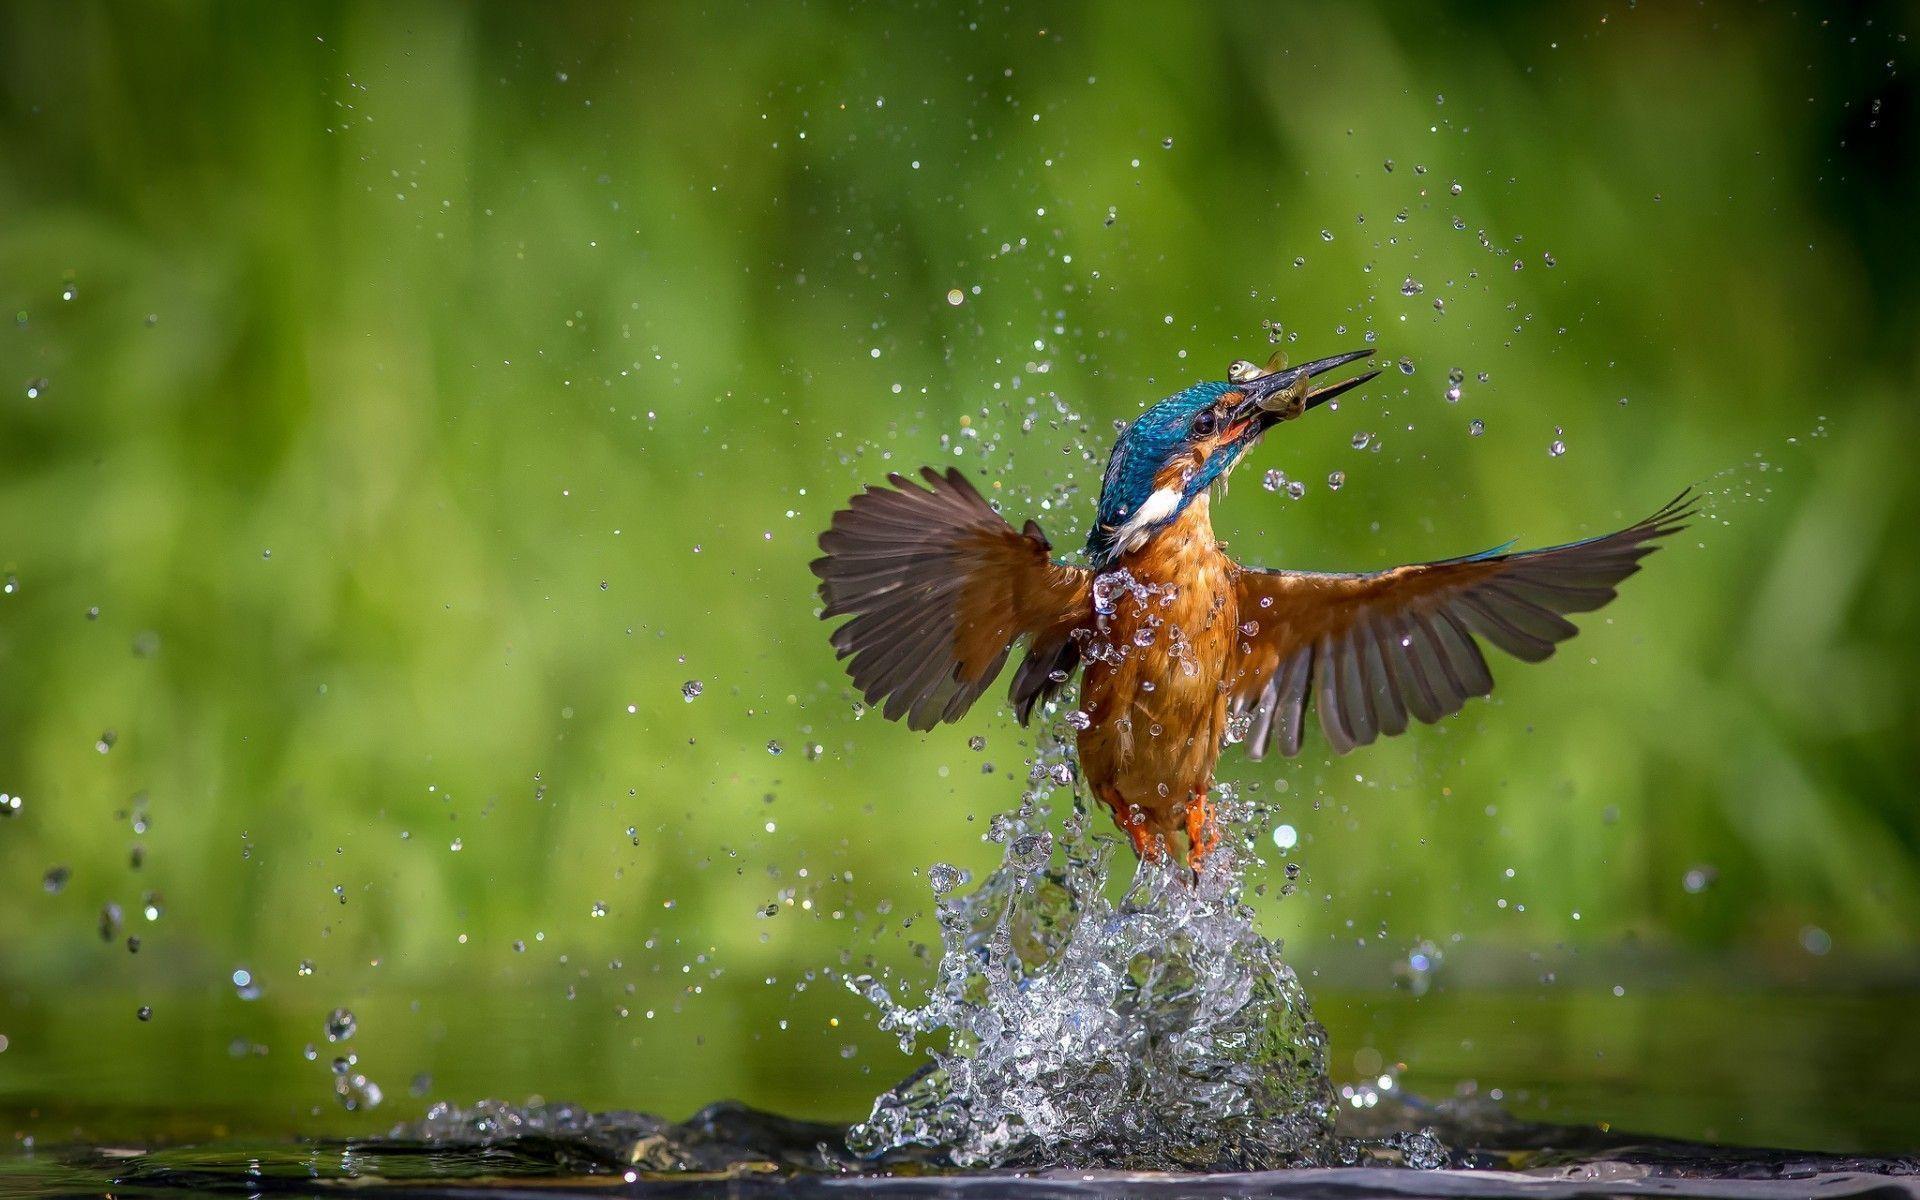 Kingfisher Wallpapers - Wallpaper Cave